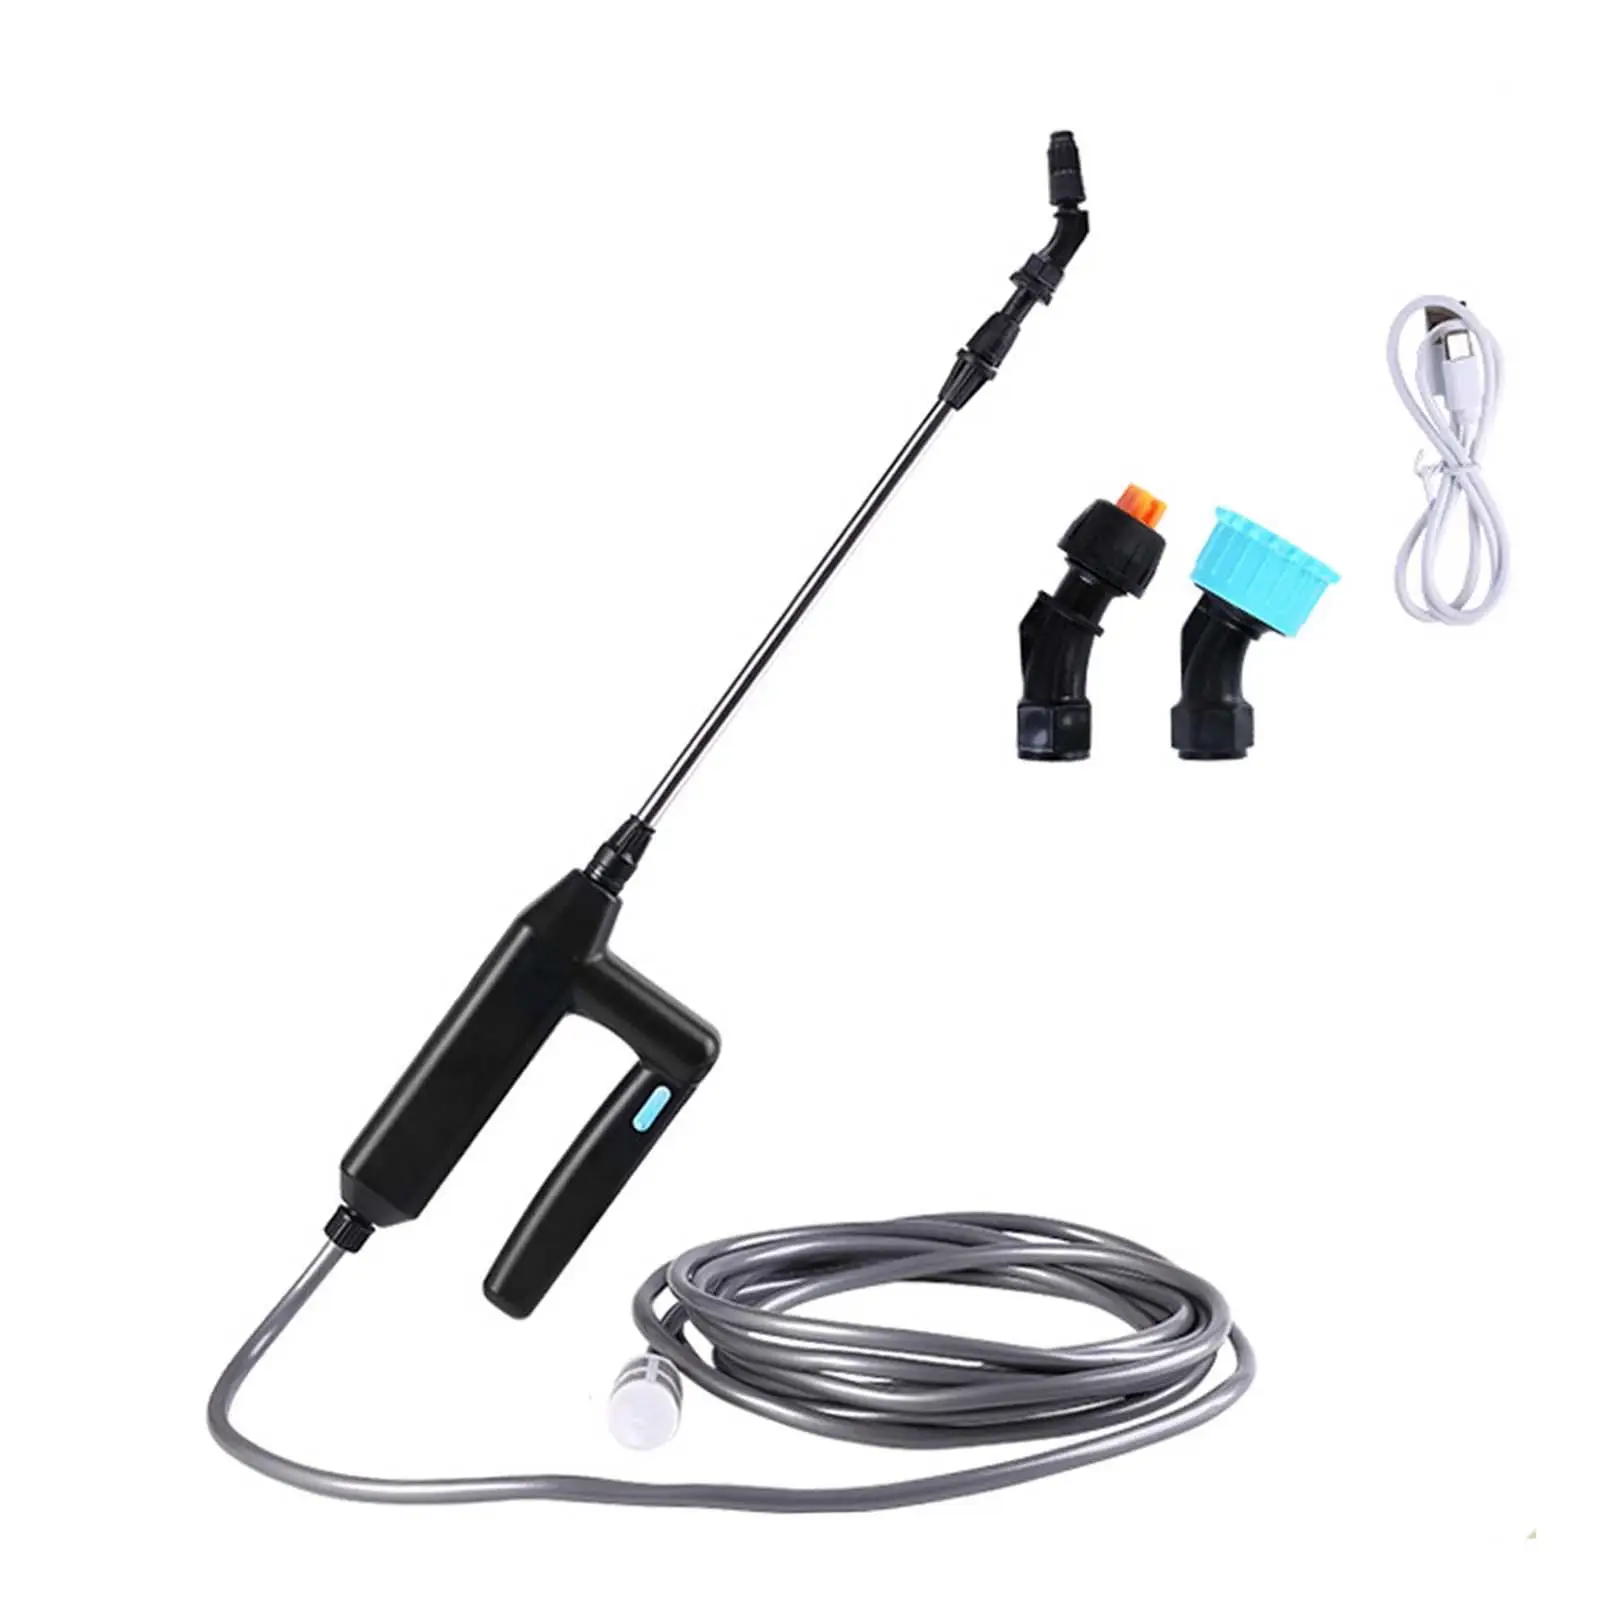 Automatic High Pressure Air Pump Sprayer for Pets Shower Household Spraying